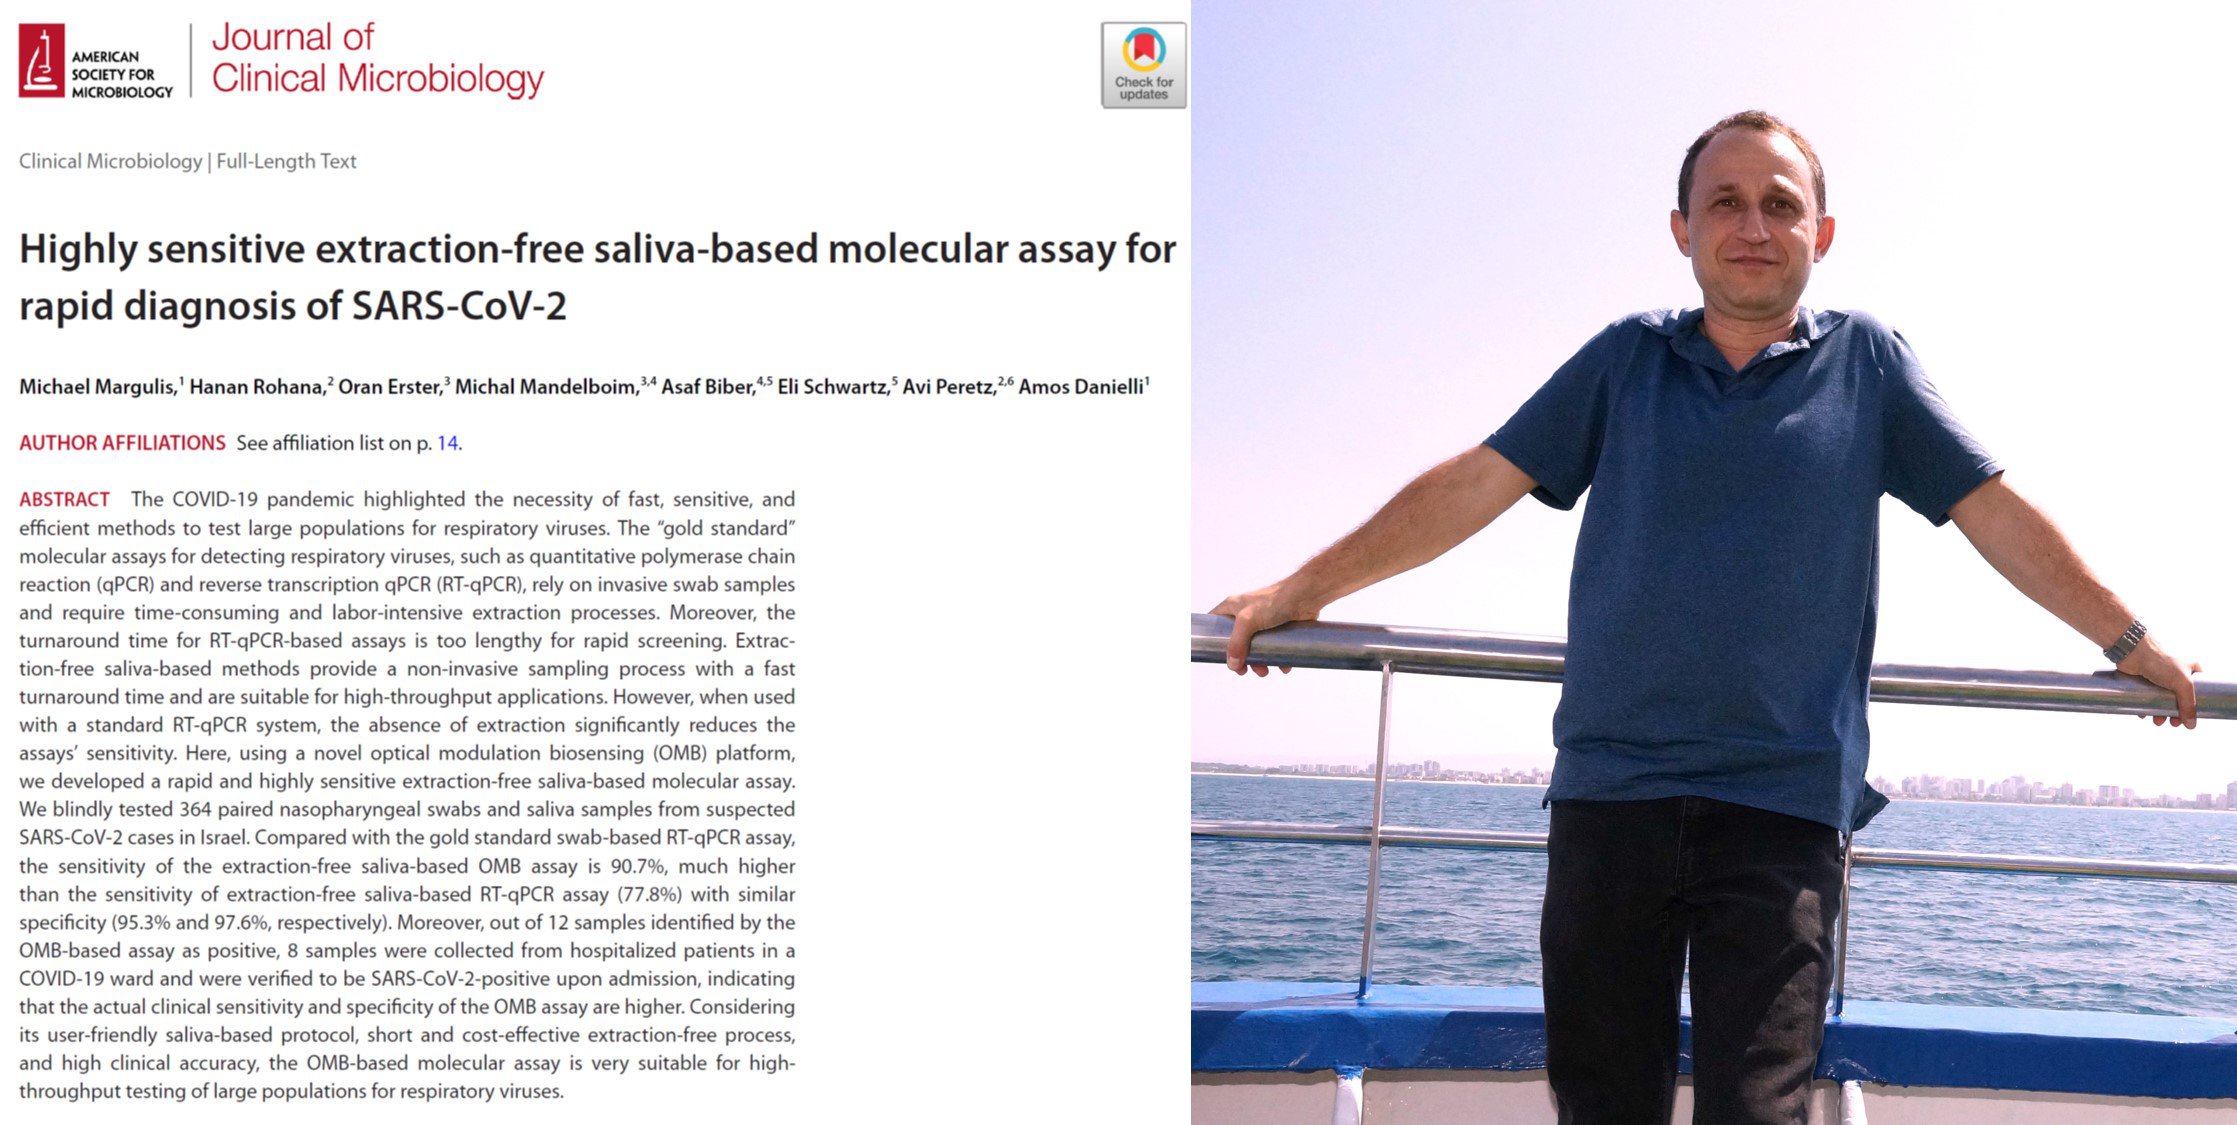 Congratulations to our lab alumnus, Dr. Michael Marguils, for the publication of his paper on extraction-free saliva-based ht-OMB molecular assay for rapid and sensitive detection of SARS-Cov-2, in "The Journal of Clinical Microbiology", a widely acknowledged worldwide magazine in this field.
The paper, 'Highly sensitive extraction-free saliva-based molecular assay for rapid diagnosis of SARS-CoV-2', can be found in the Publications section, and at DOI: 10.1128/jcm.00600-24